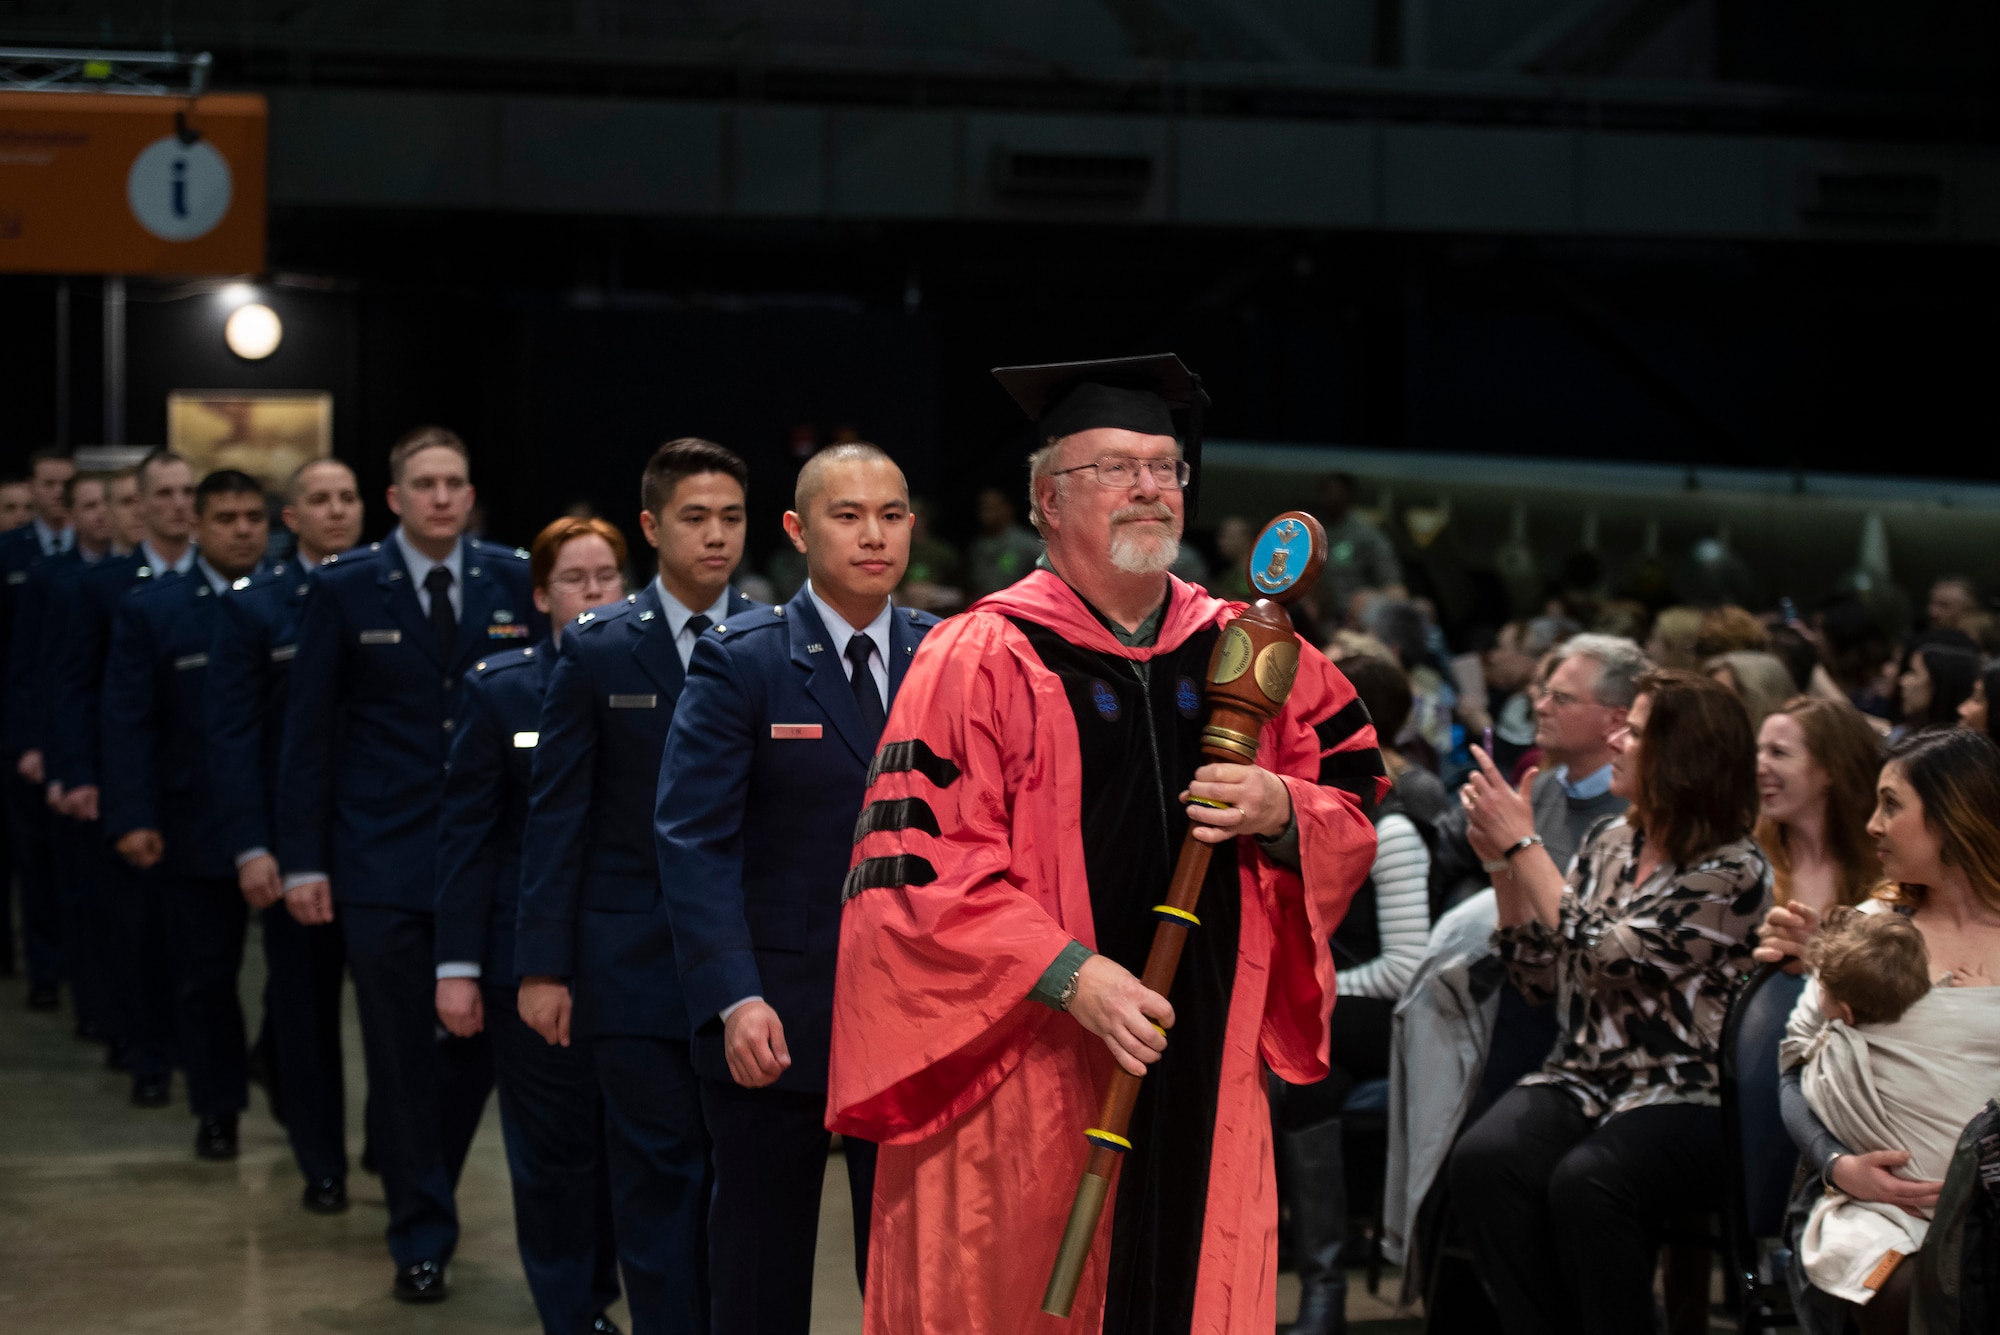 Dr. William Wiesel, grand marshal, leads 2nd Lt. Kevin Lin, the other graduates and faculty into the Air Force Institute of Technology commencement ceremony March 21, 2019, at the National Museum of the U.S. Air Force, Wright-Patterson Air Force Base, Ohio. More than 200 advanced degrees were awarded to officers, enlisted and civilians from the U.S., Australian and Brazilian armed forces. (U.S. Air Force photo by R.J. Oriez)